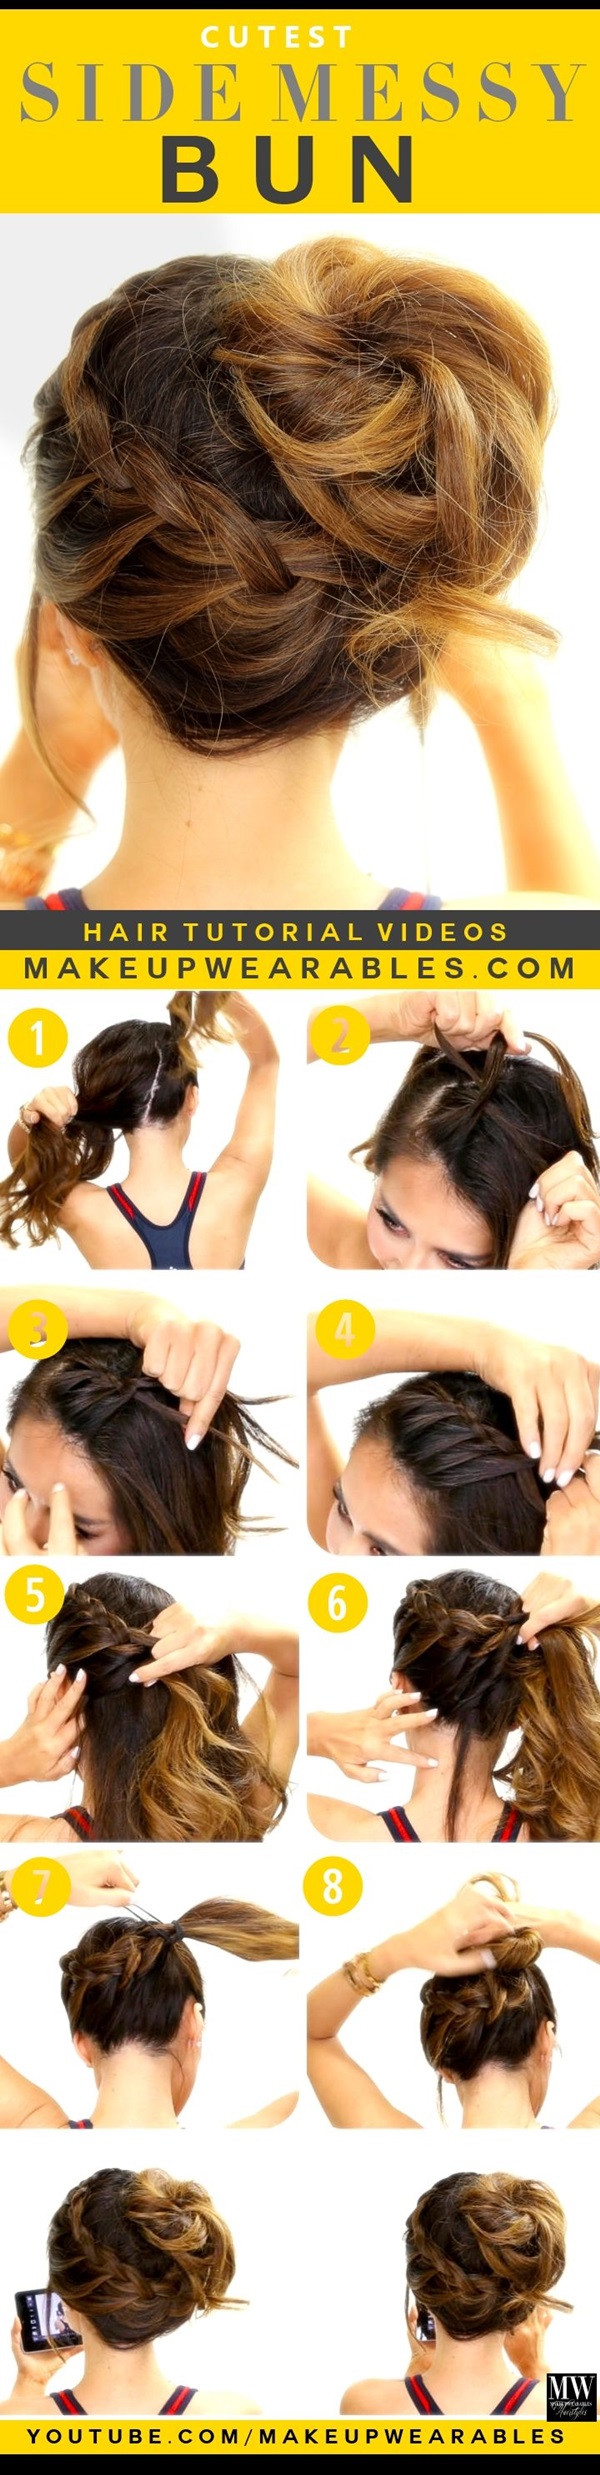 Simple Five Minute Hairstyles (37)